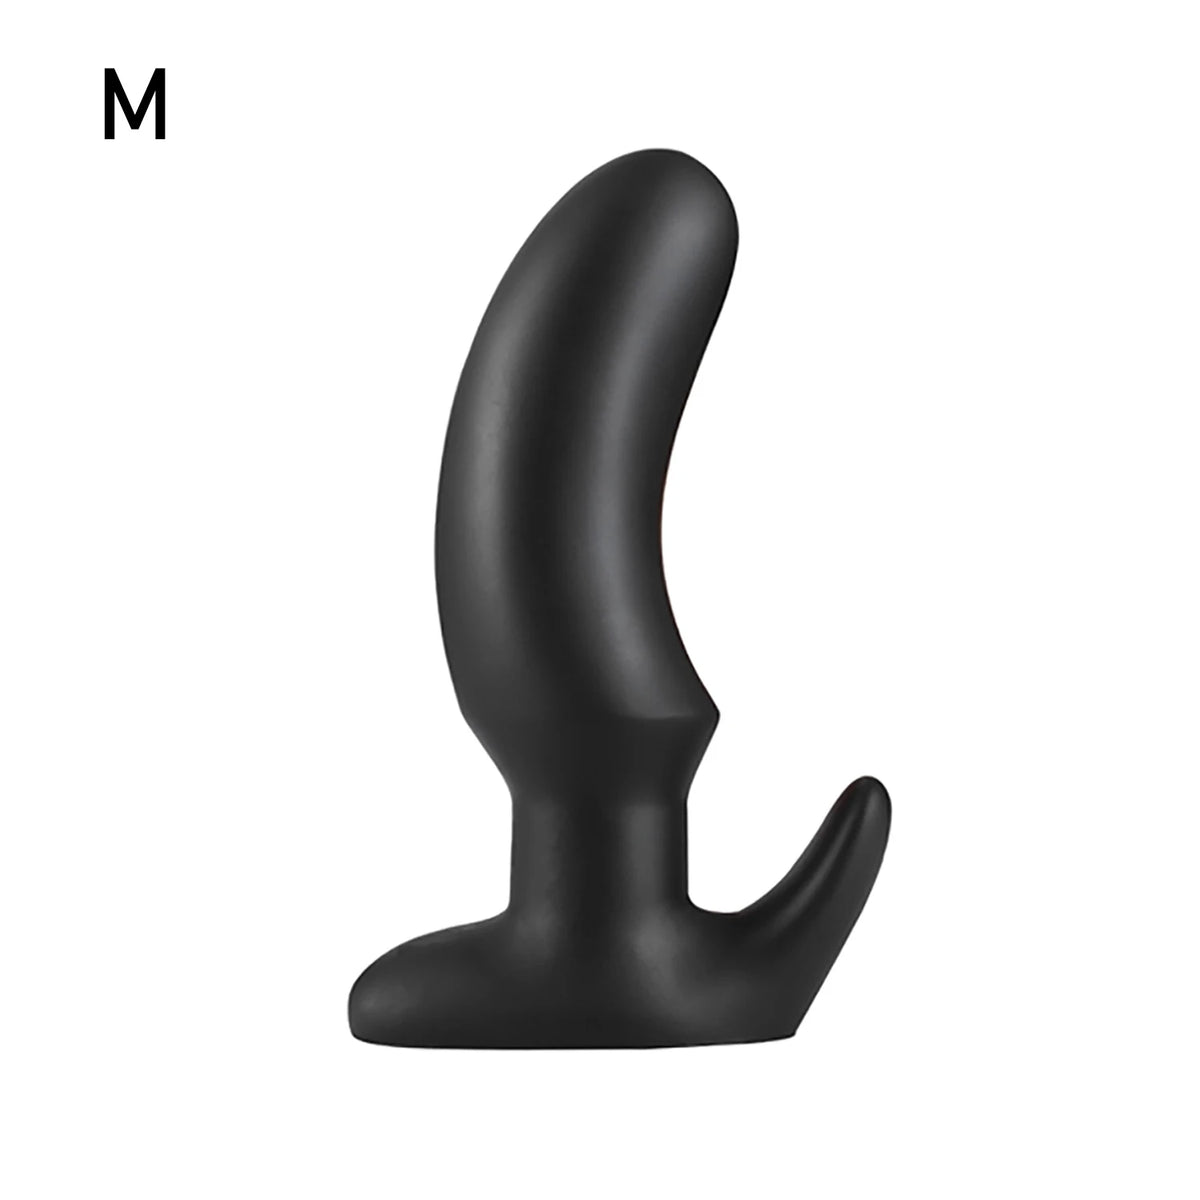 Midas Touch - Anal Toy - Twisted Jezebel